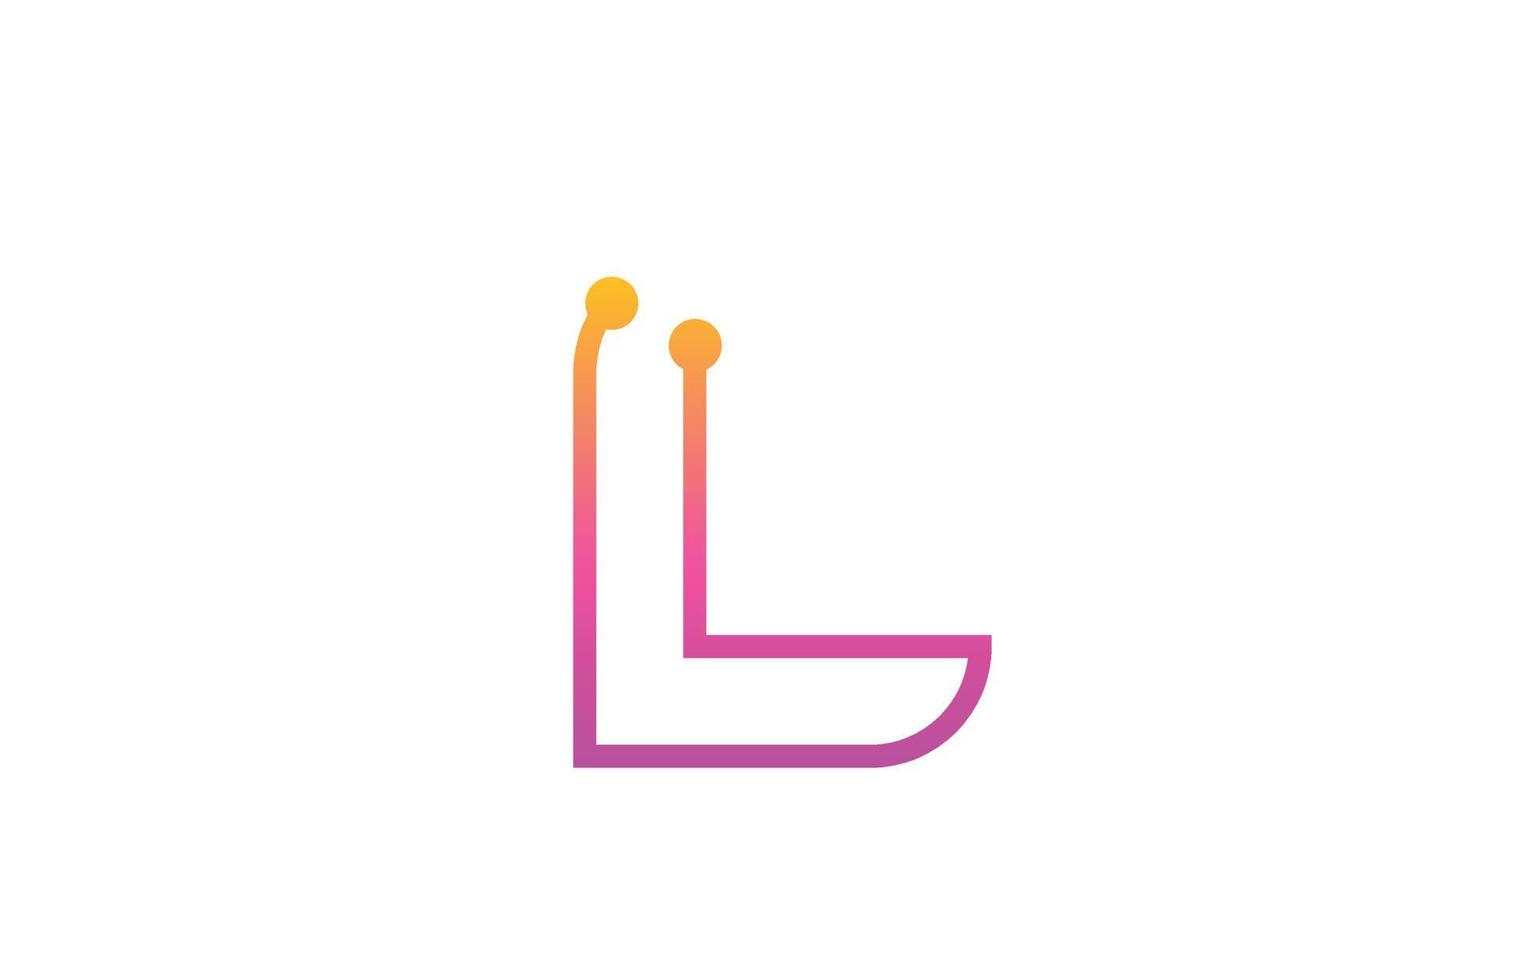 L pink alphabet letter icon logo design with dot. Creative template for company and business with line vector